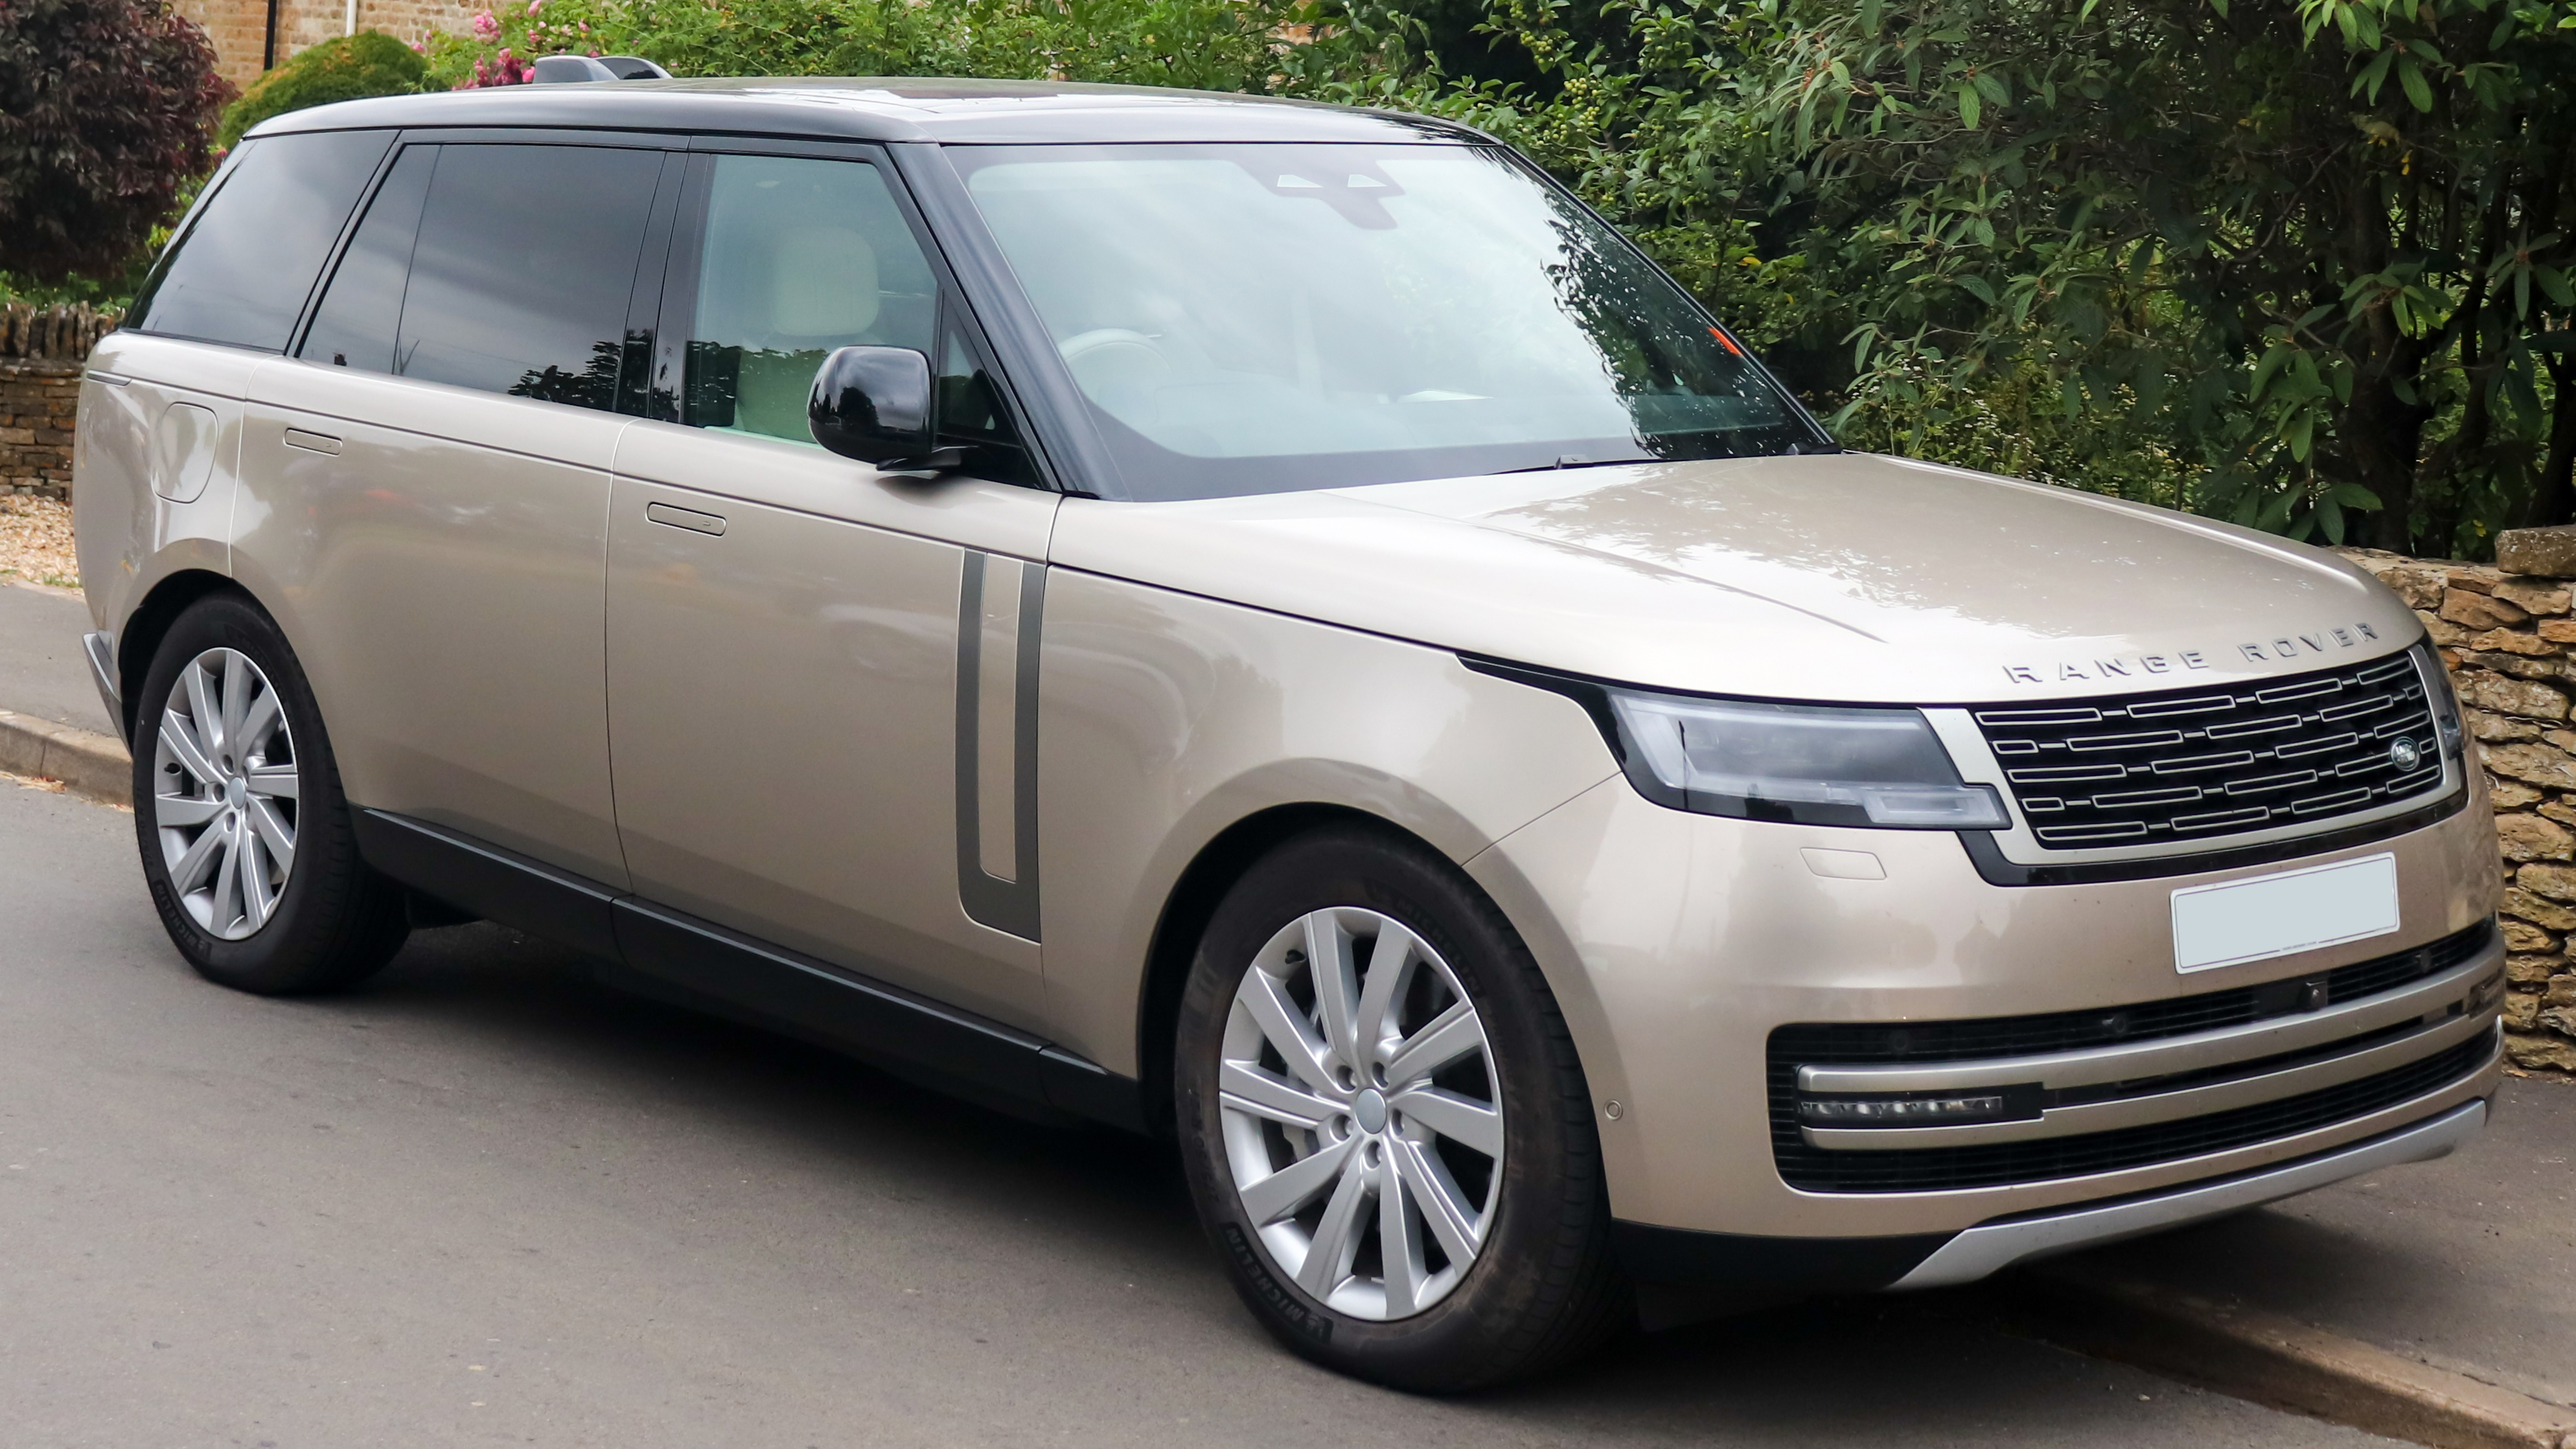 Assembling of flagship Range Rover model to soon begin in India